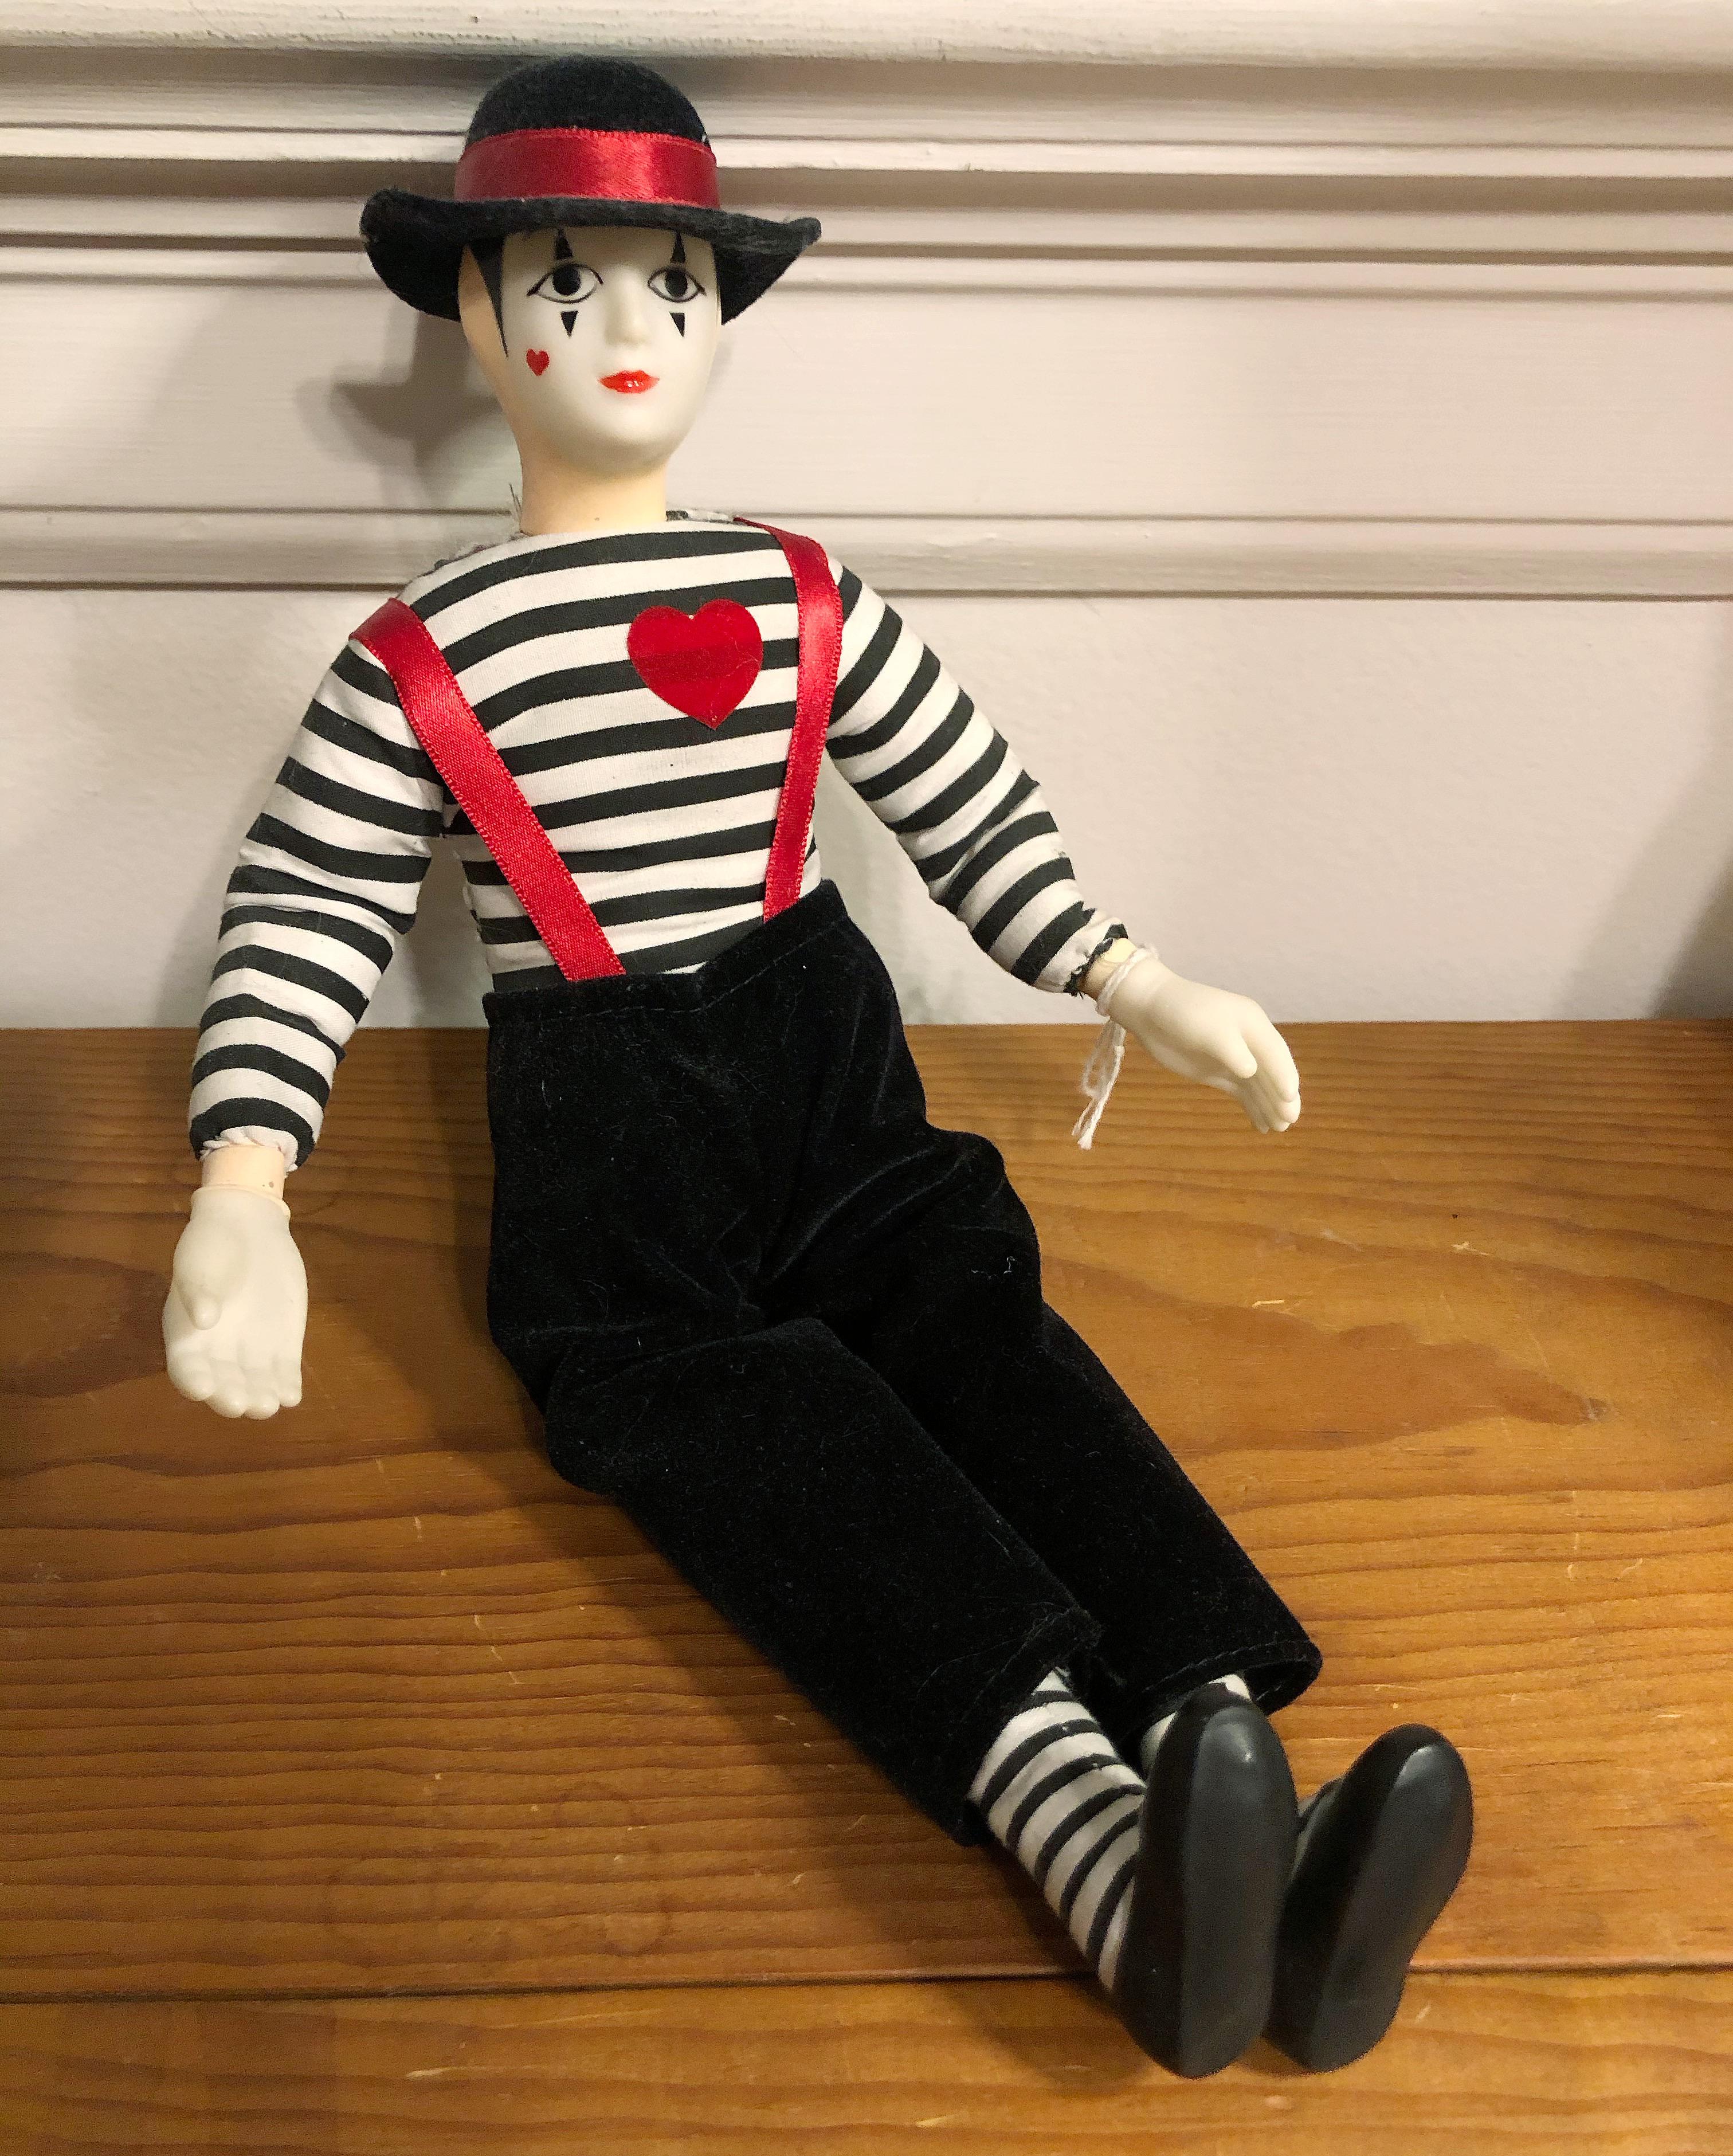 a photo of a fabric mime clown doll with a black and white striped shirt with a small red heart sown on it, black pants with red suspenders and a black hat with a red fabric stripe